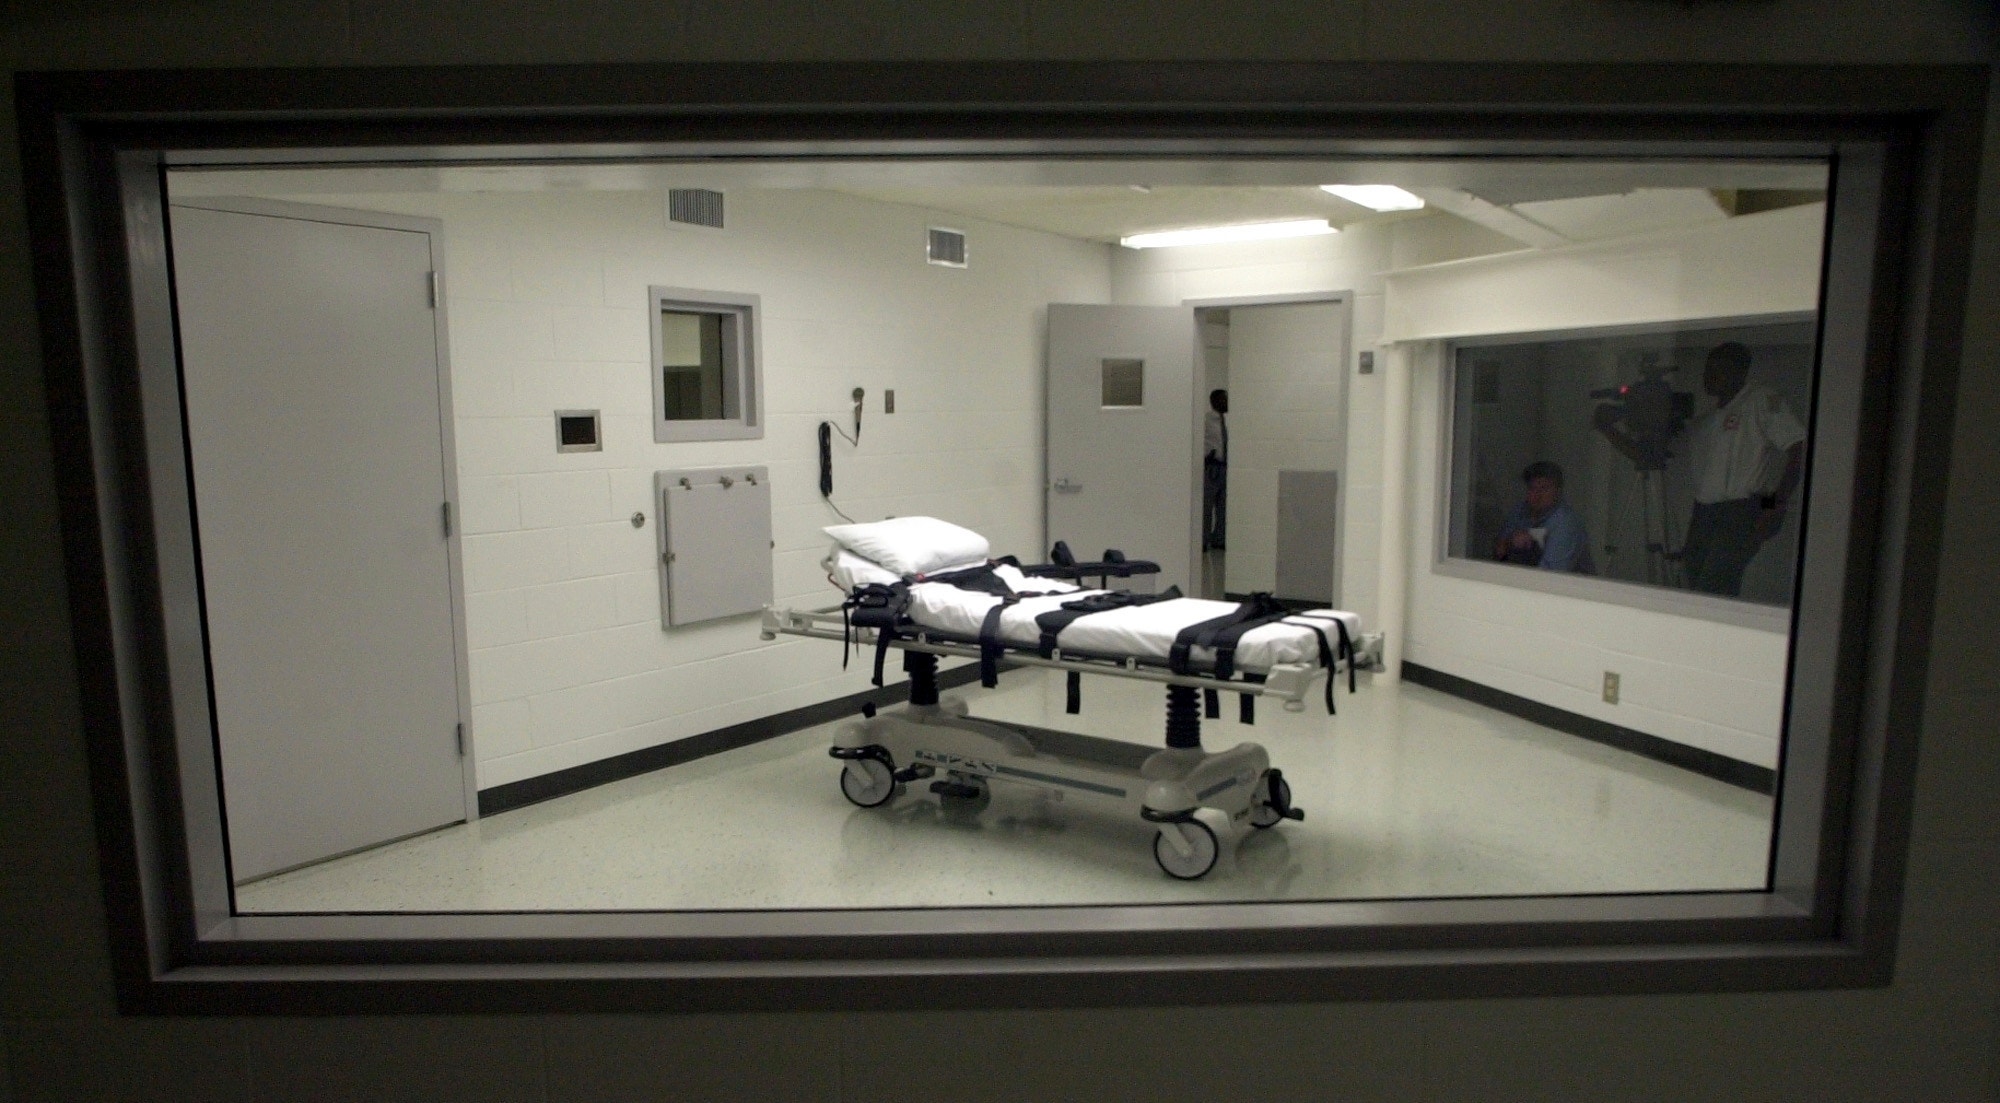 Alabama executions to recommence following completion of internal review: ‘Time to resume our duty’